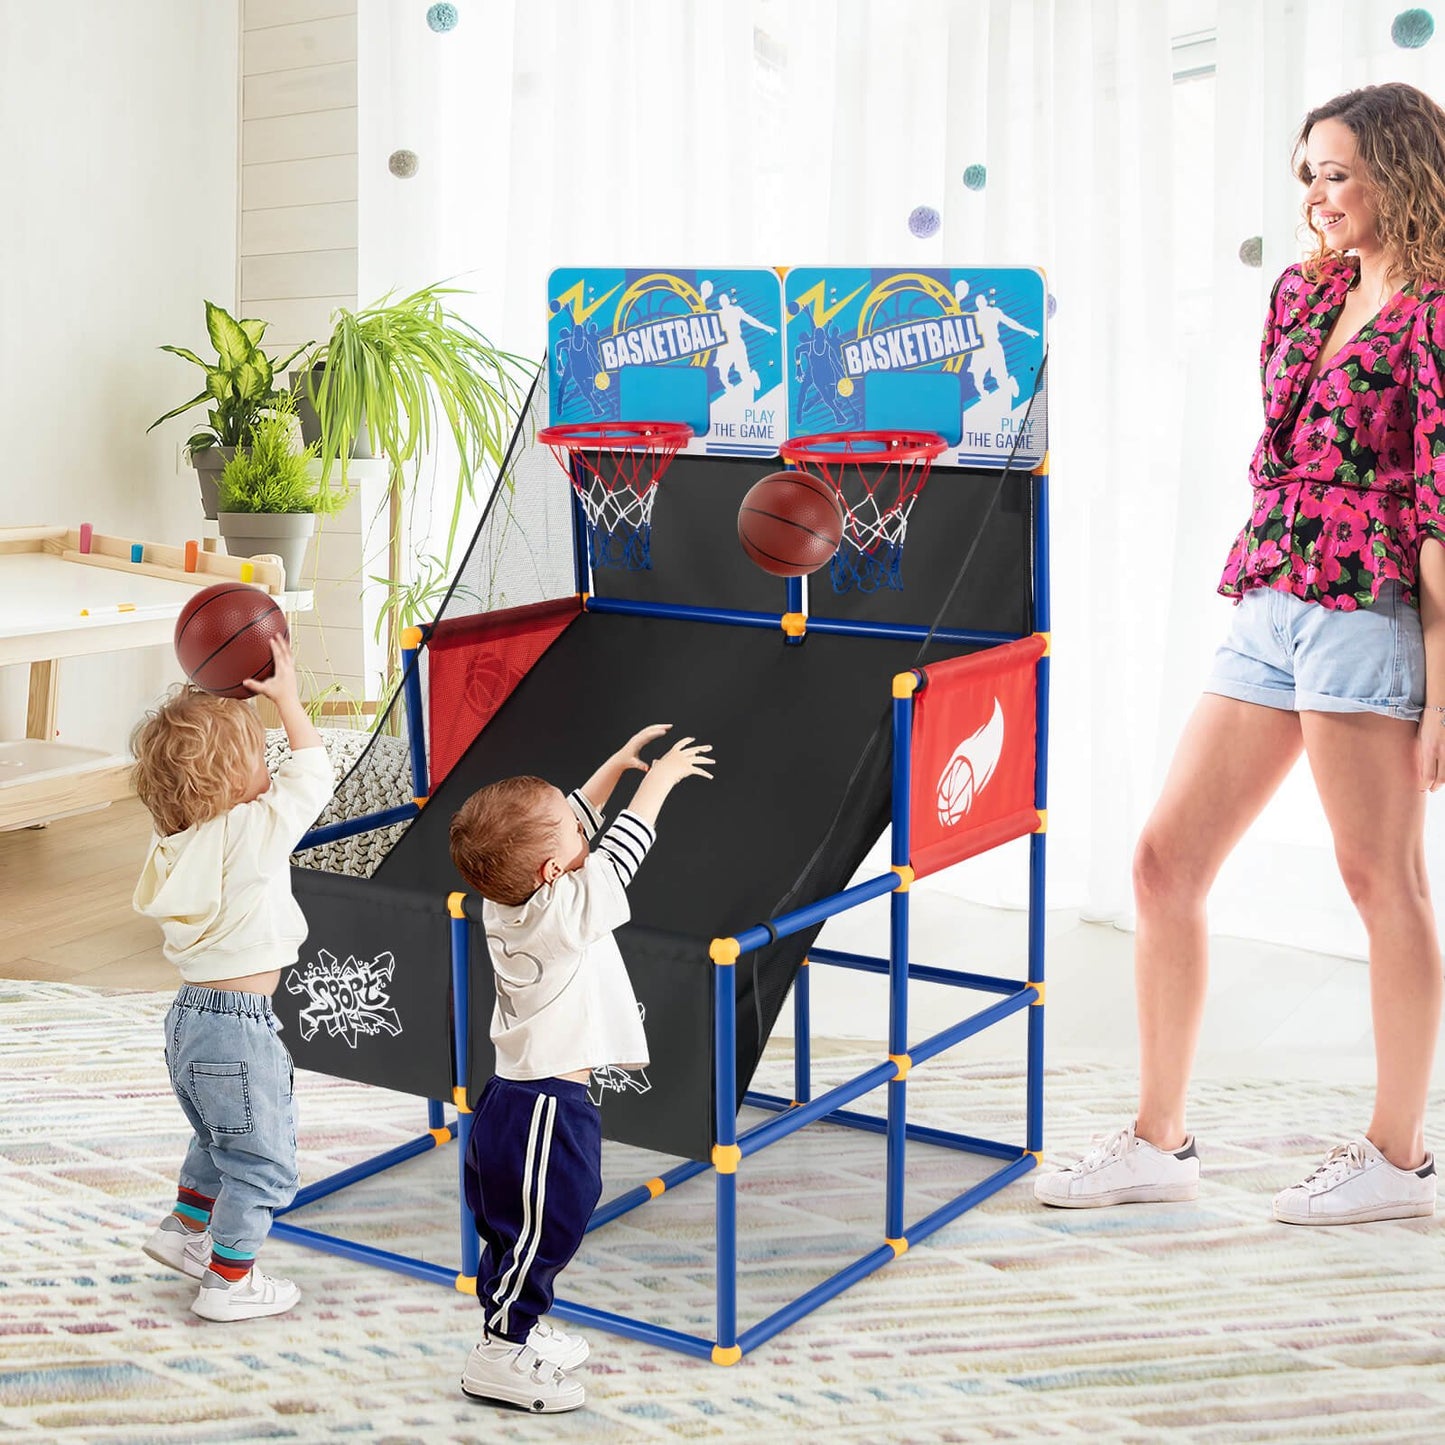 Kids Arcade Basketball Game Set with 4 Basketballs and Ball Pump, Multicolor at Gallery Canada